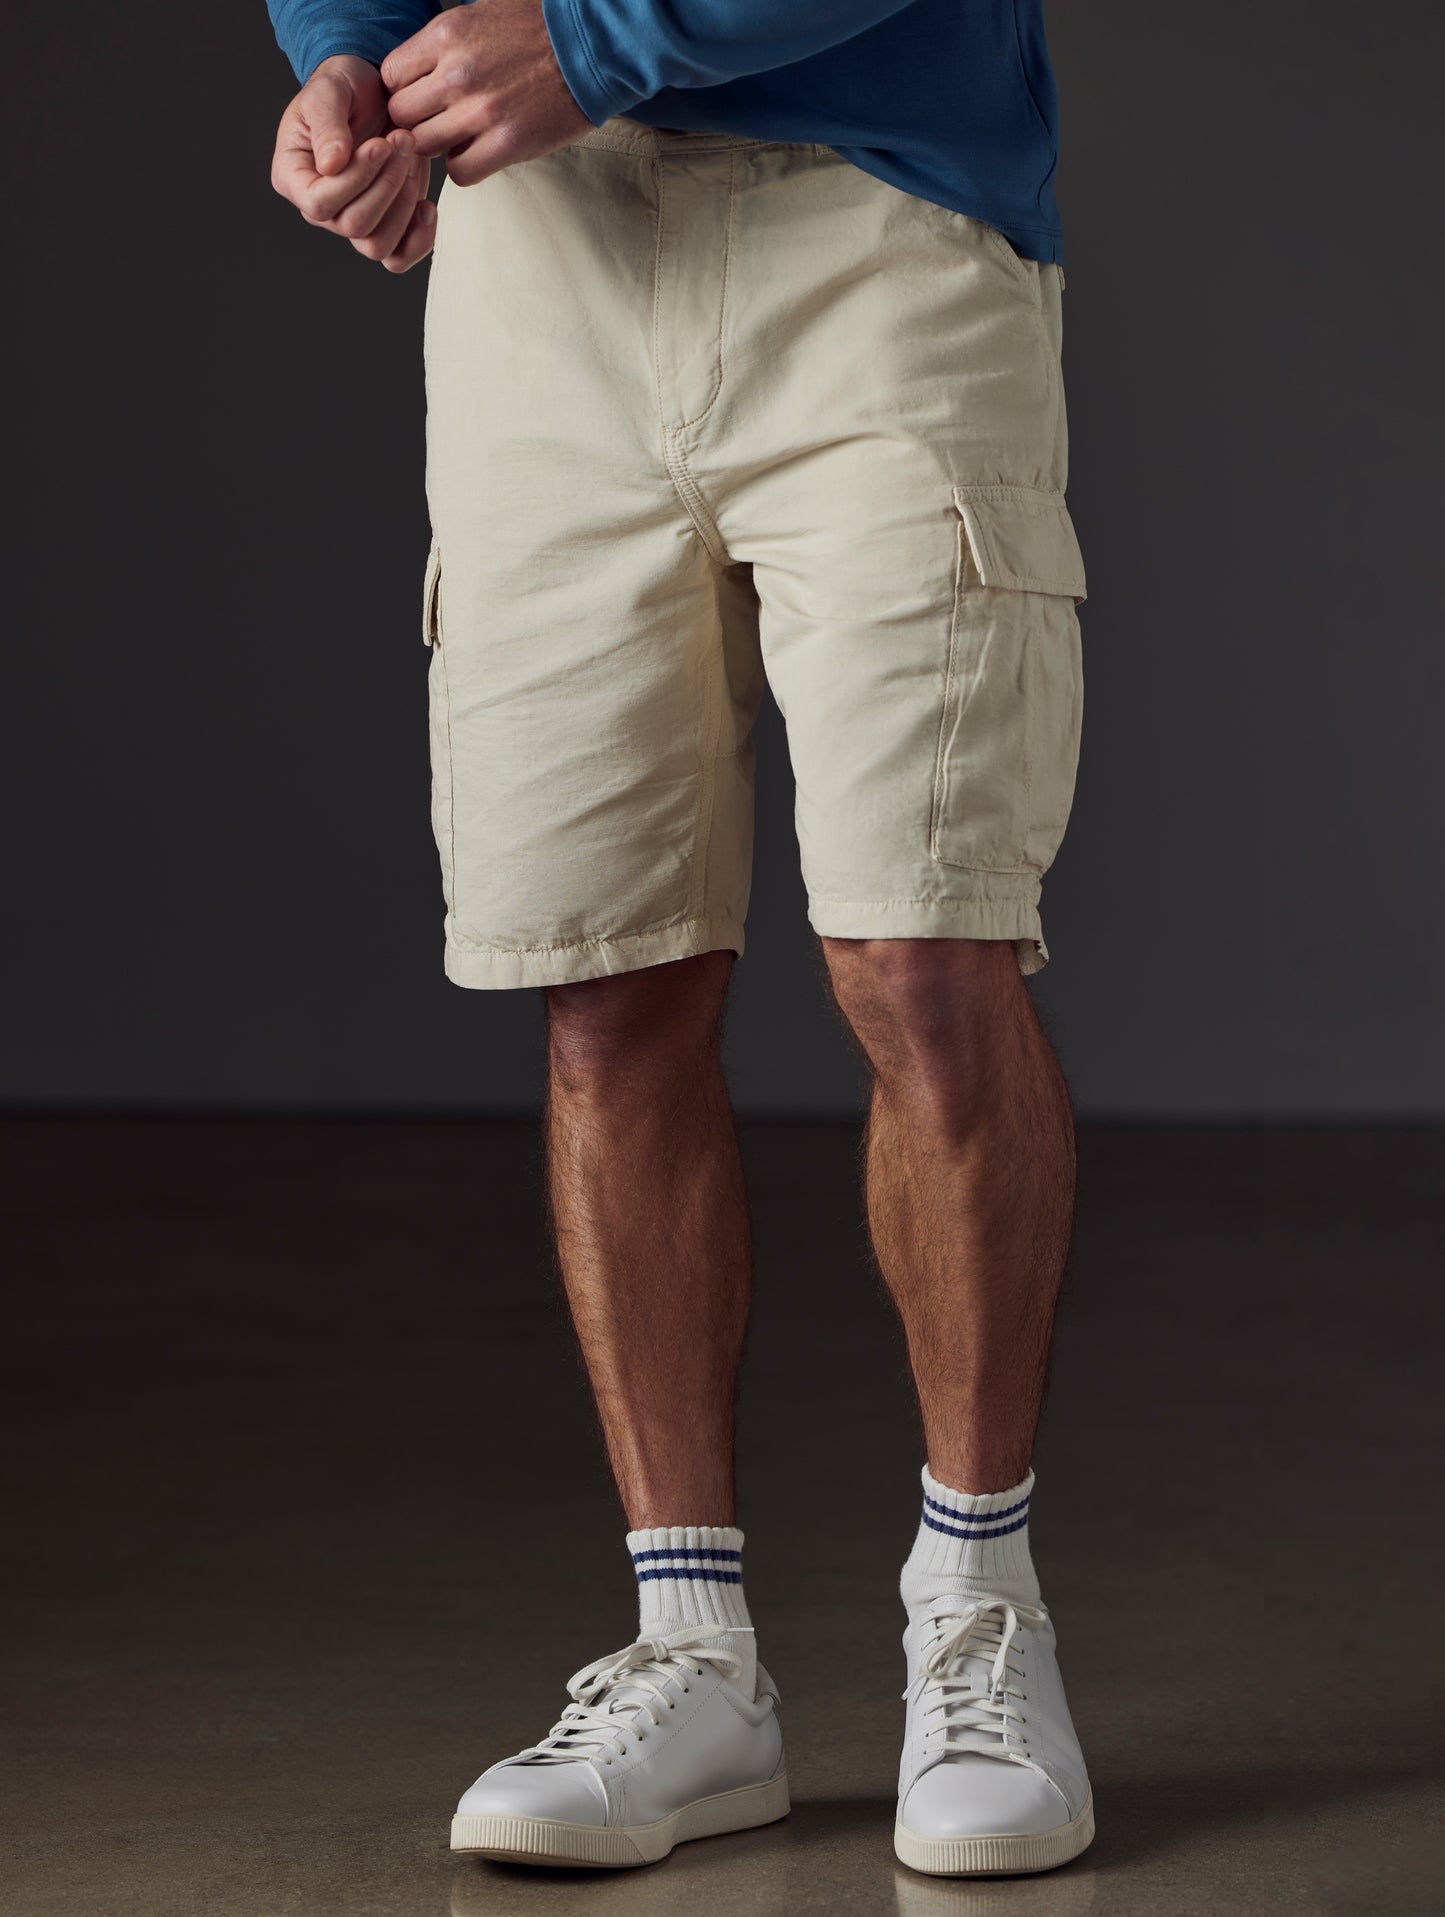 beige fatigue shorts from AETHER Apparel